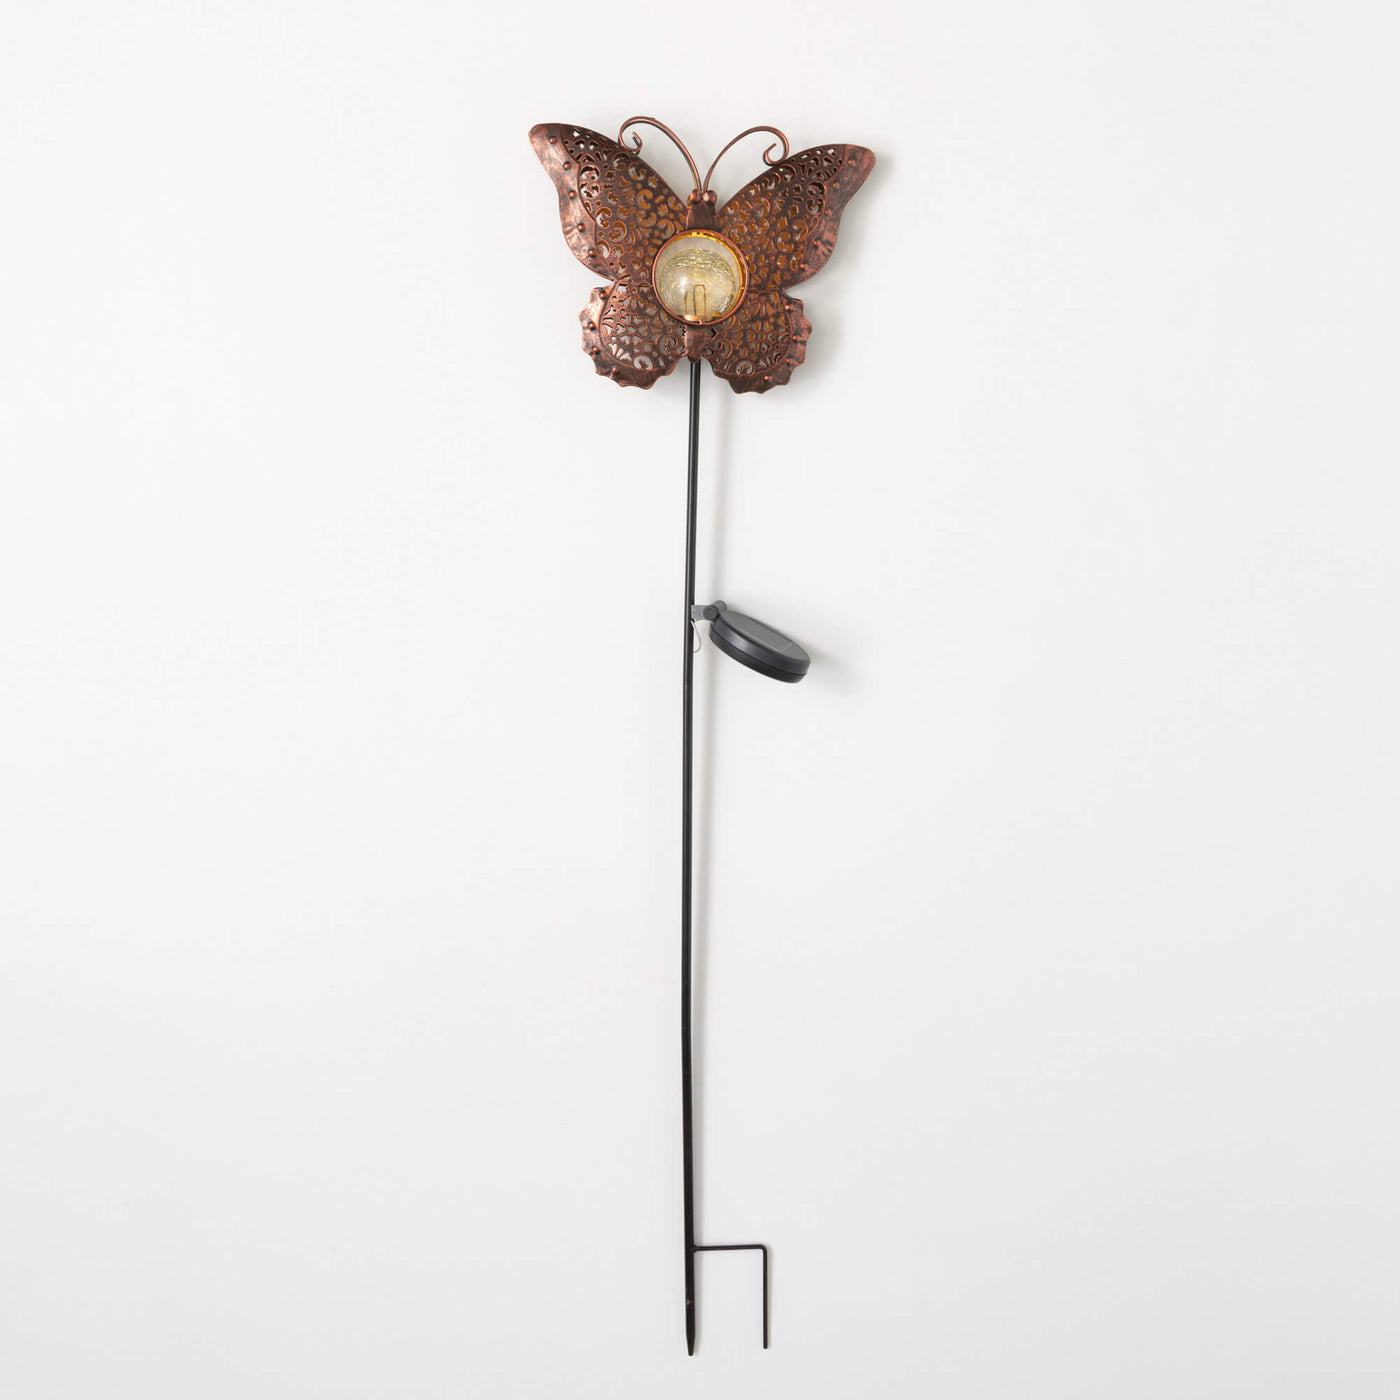 Butterfly Solar Garden Light Stake available at Davis Porch and Patio Weatherford Texas